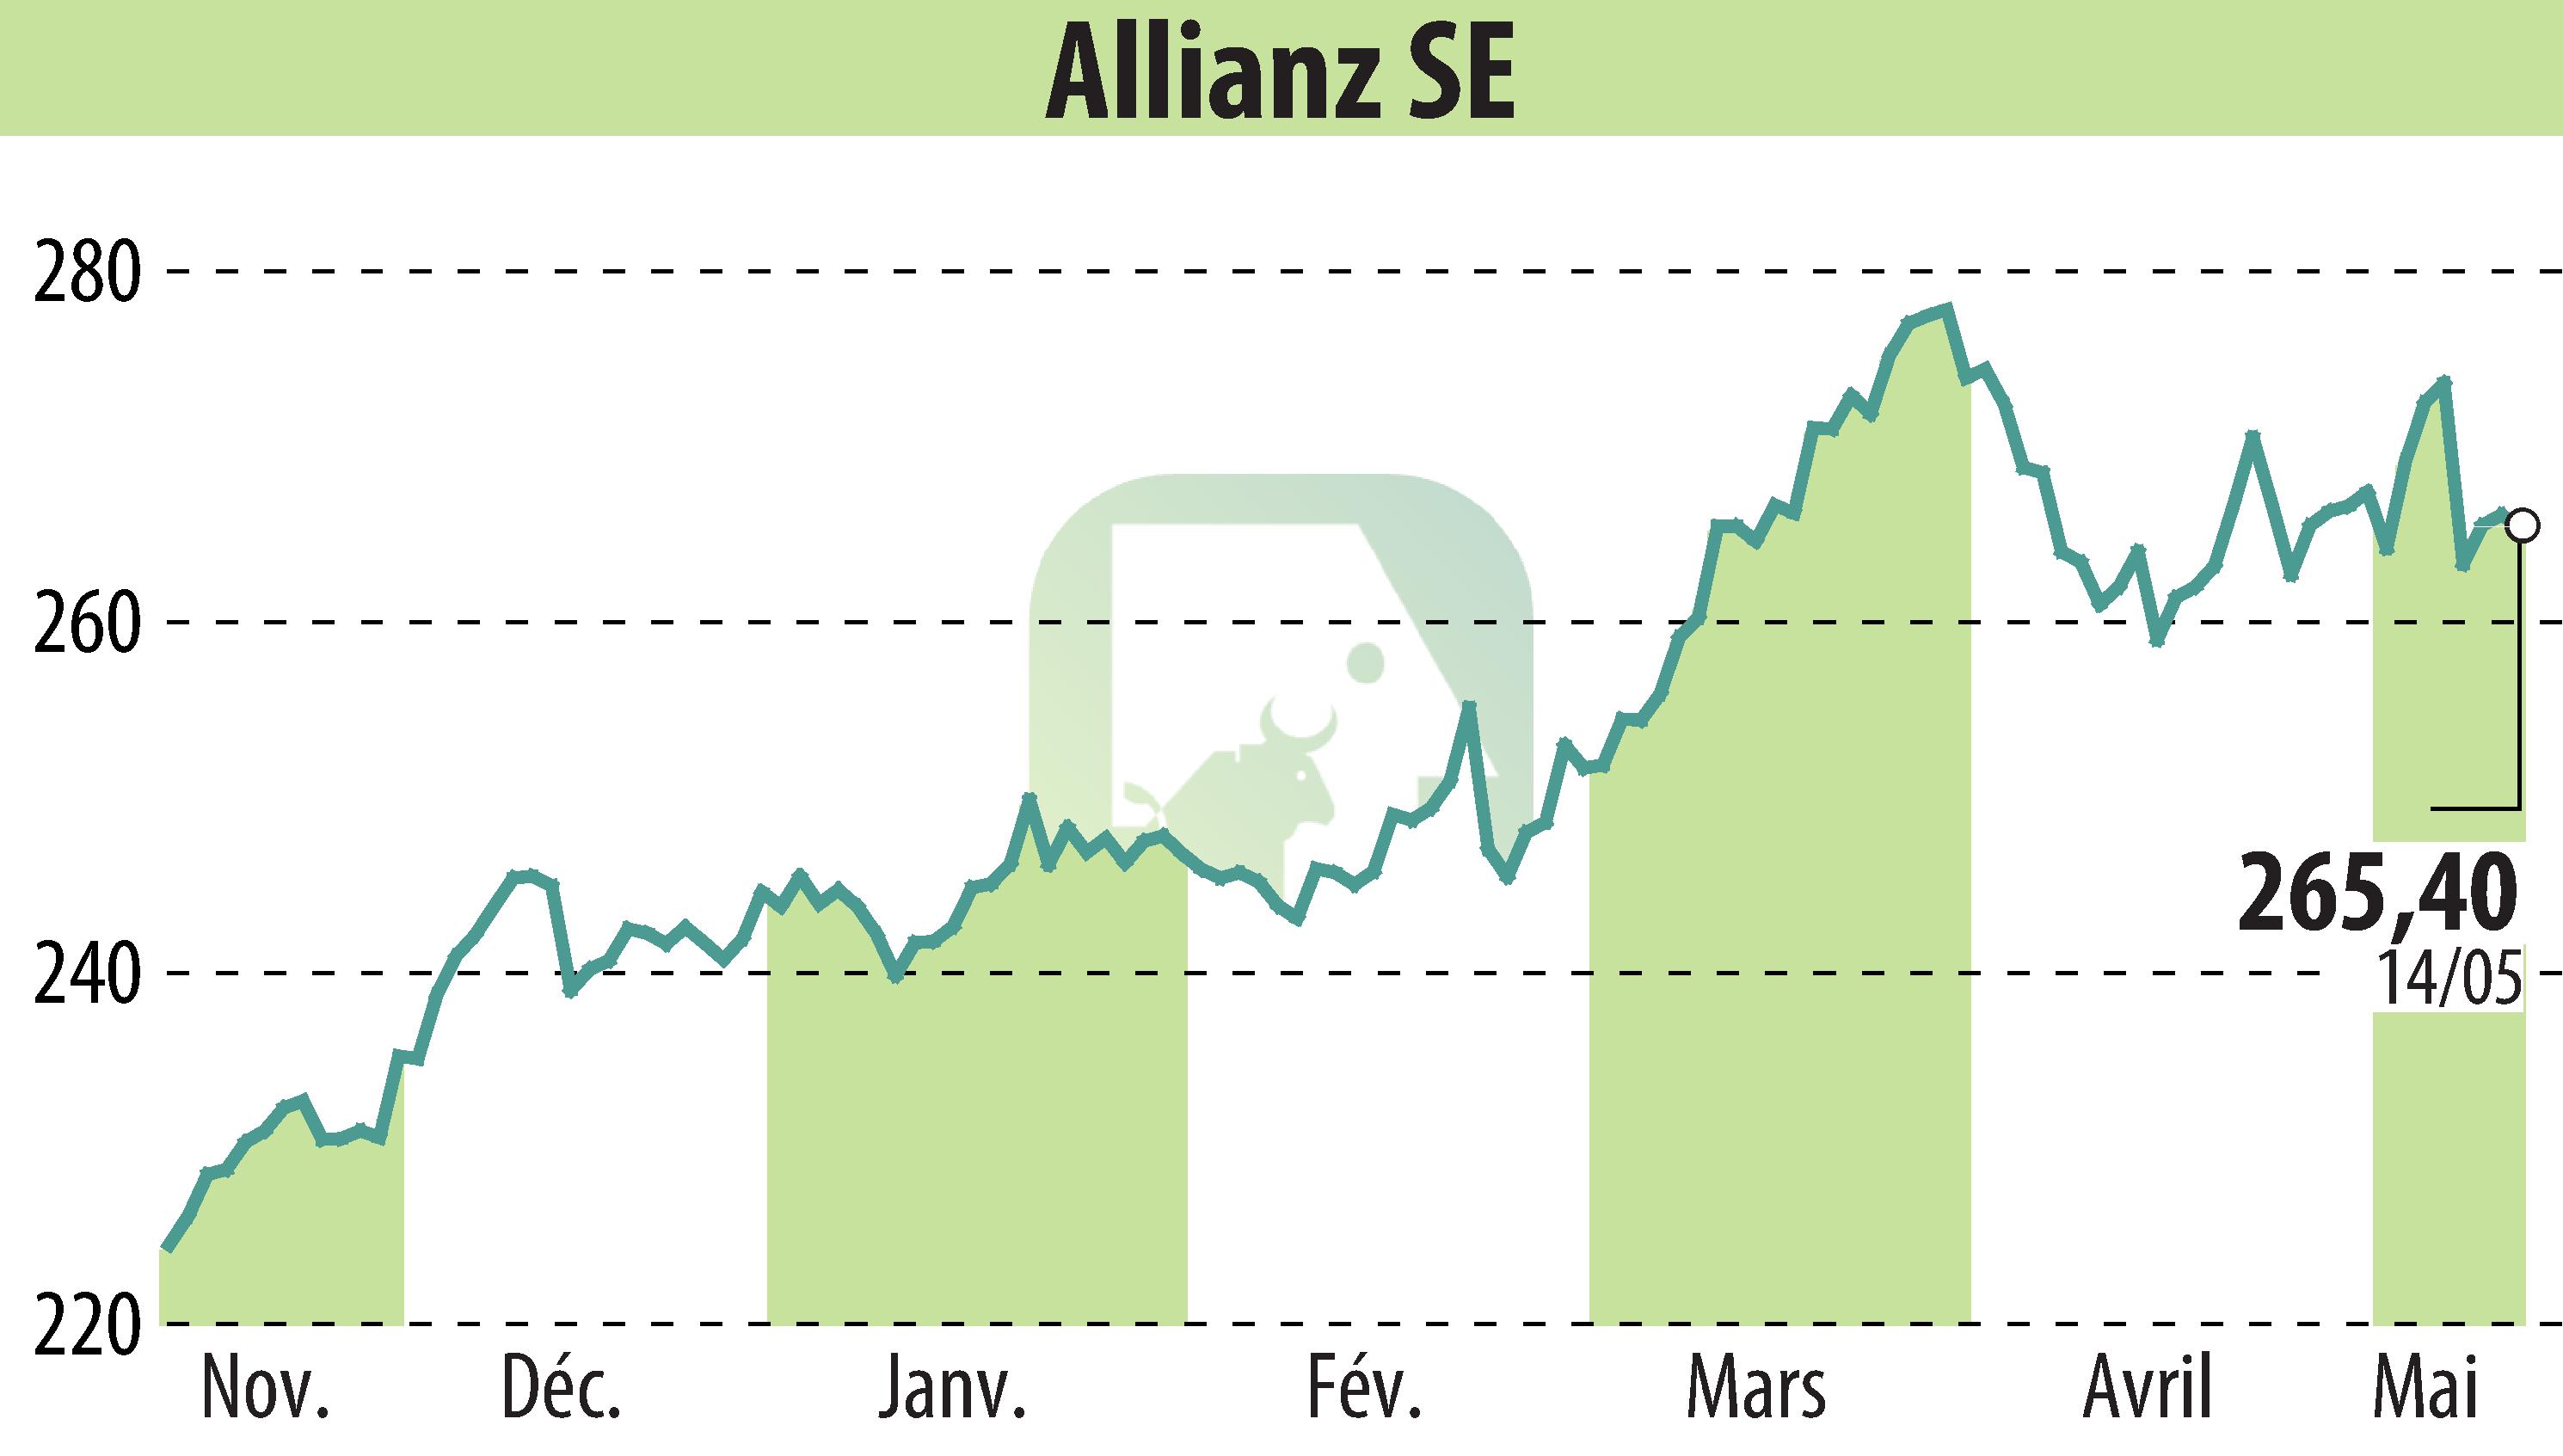 Stock price chart of Allianz SE (EBR:ALV) showing fluctuations.